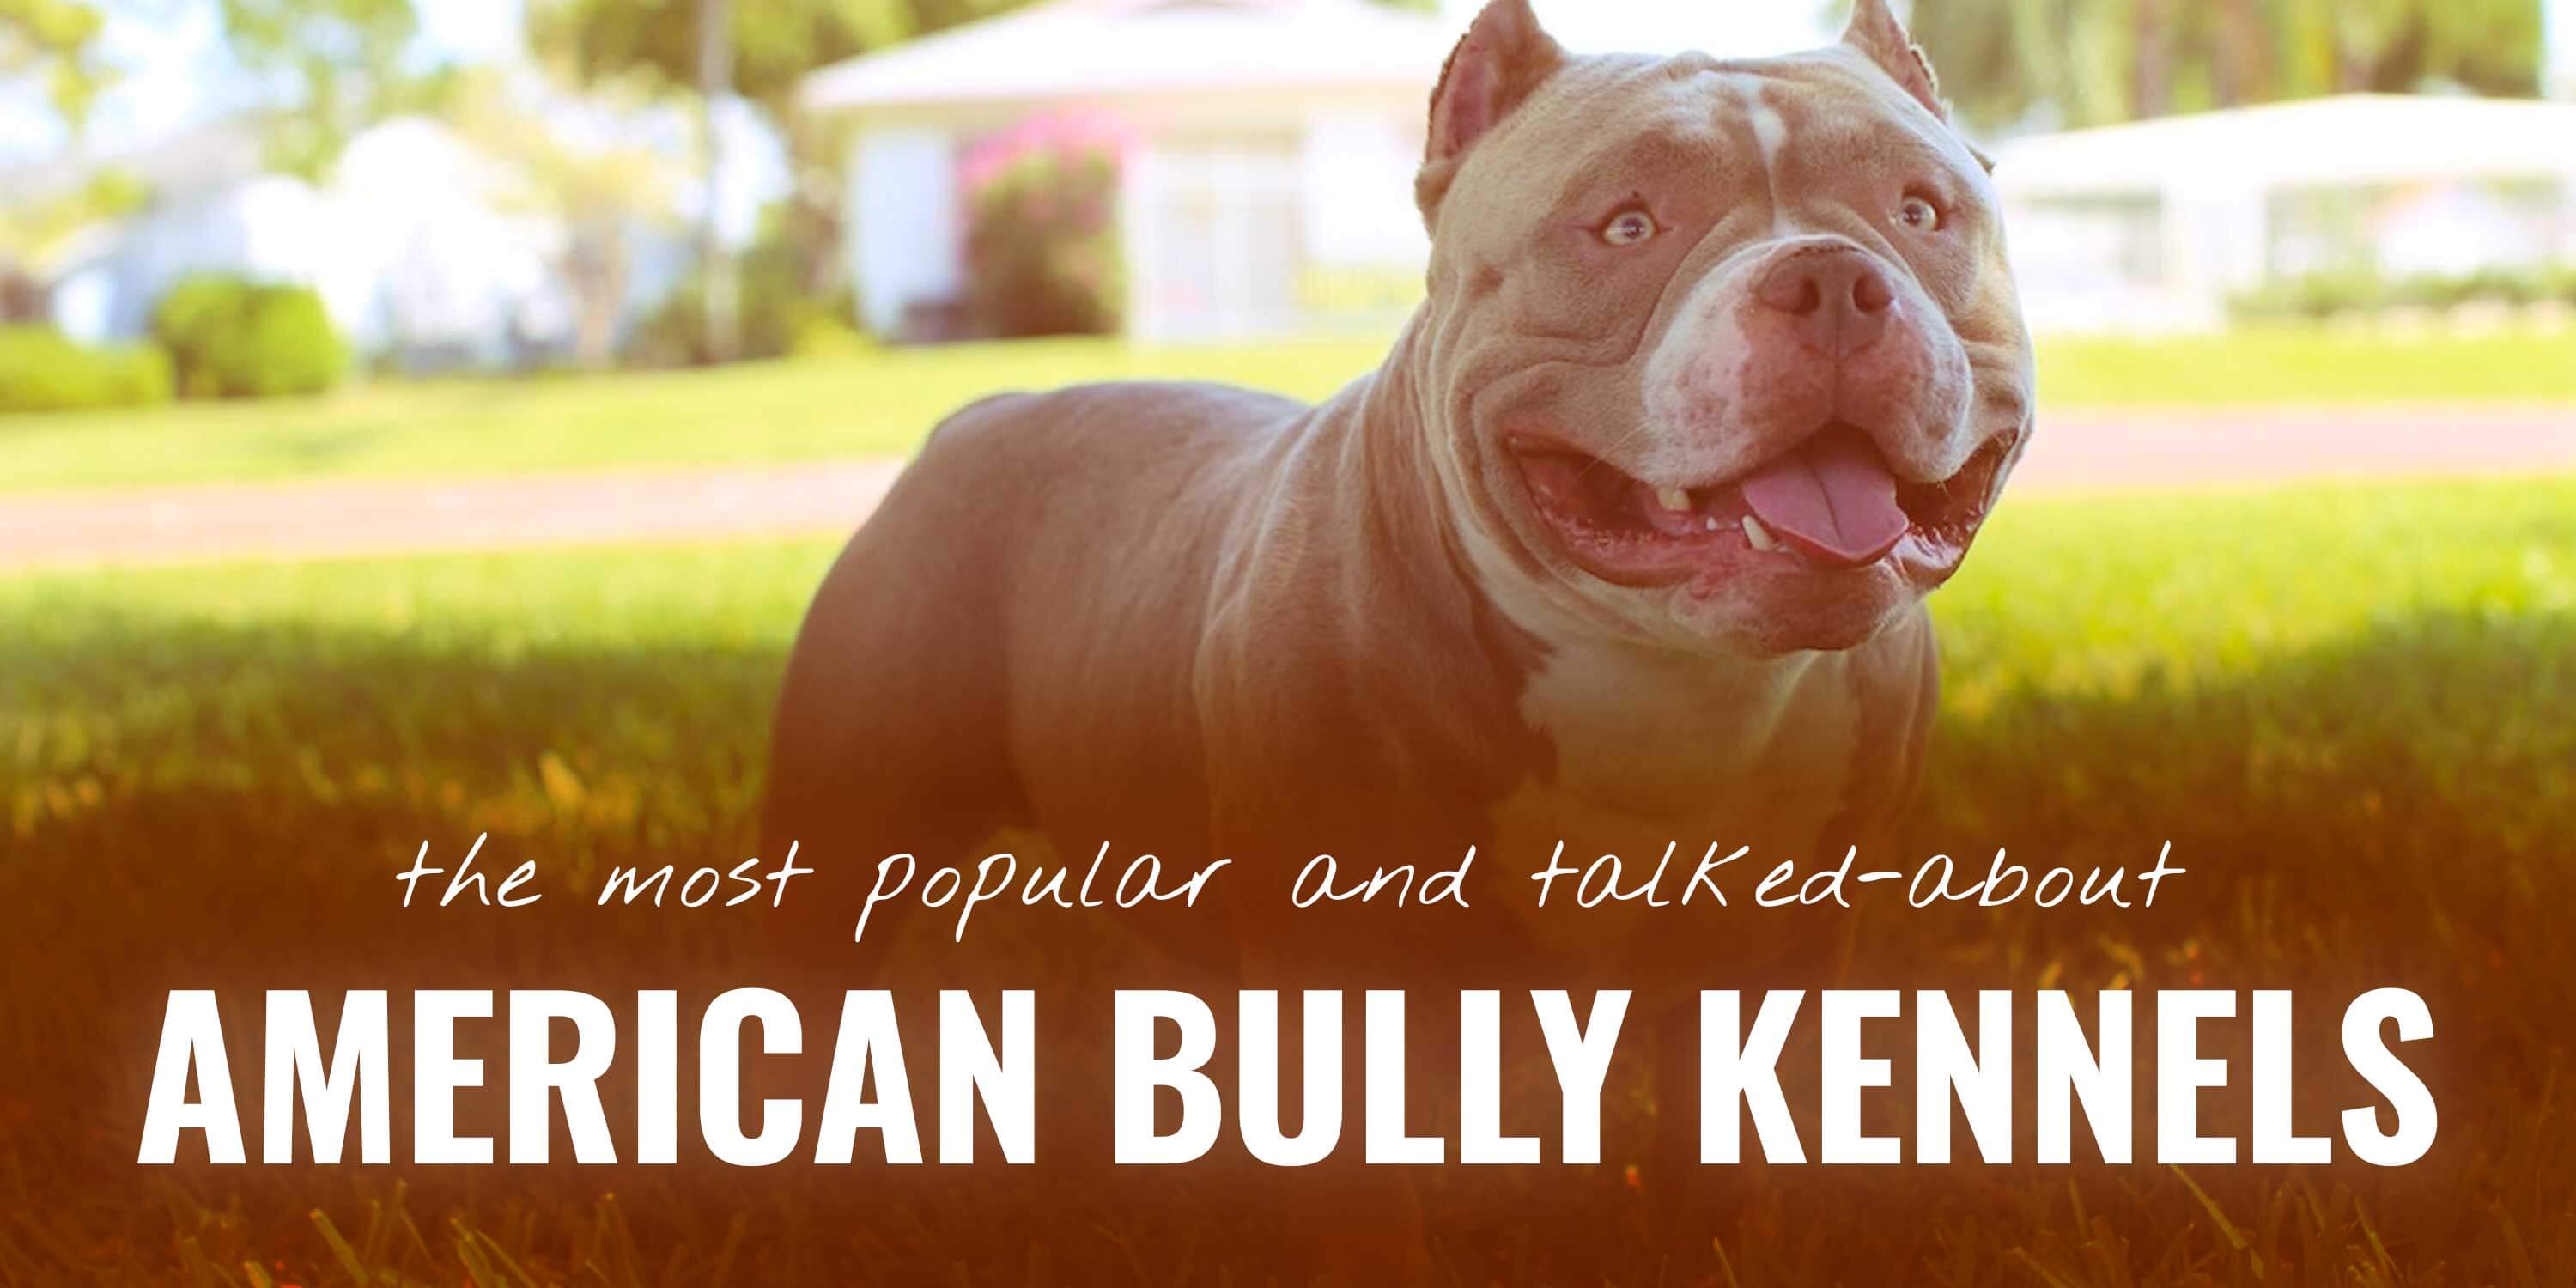 Top 10 American Bully Kennels – From 